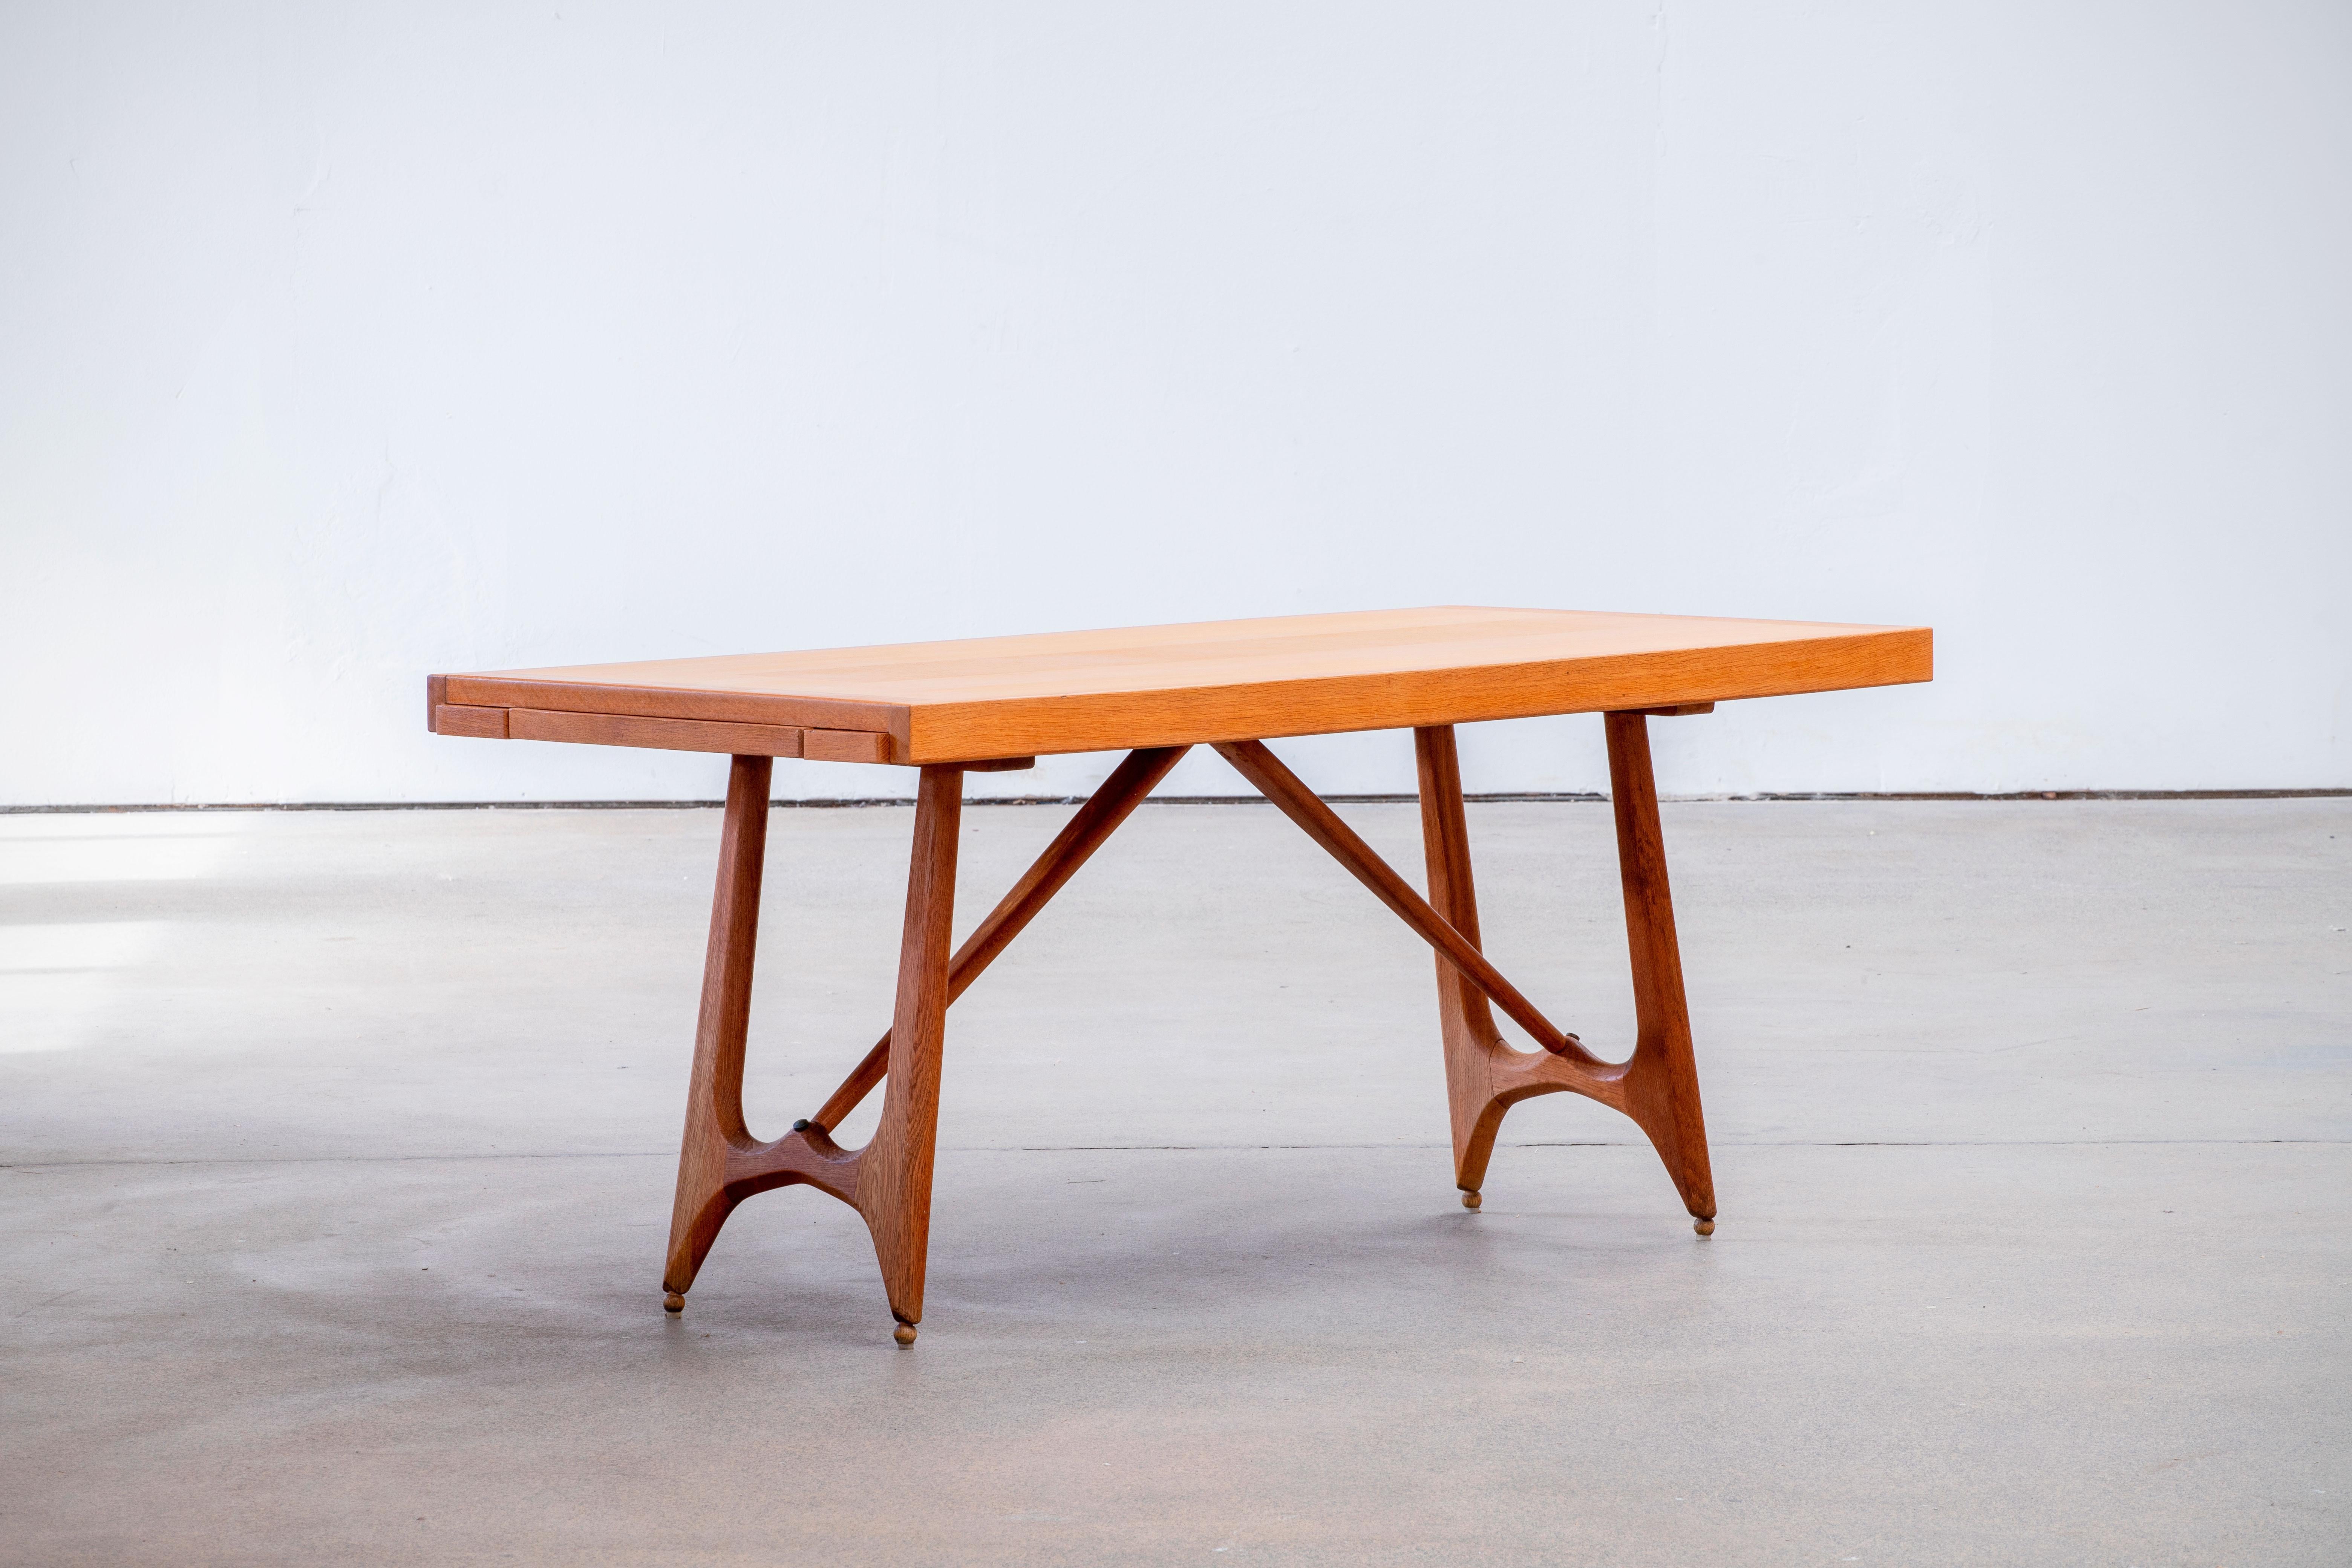 Extendable dining table by French designer duo Jacques Chambron and Robert Guillerme. The legs of this table are beautifully shaped and show nice organic forms. The top is rectangular with to extendable leaves. The leaves are 'hidden' under the top